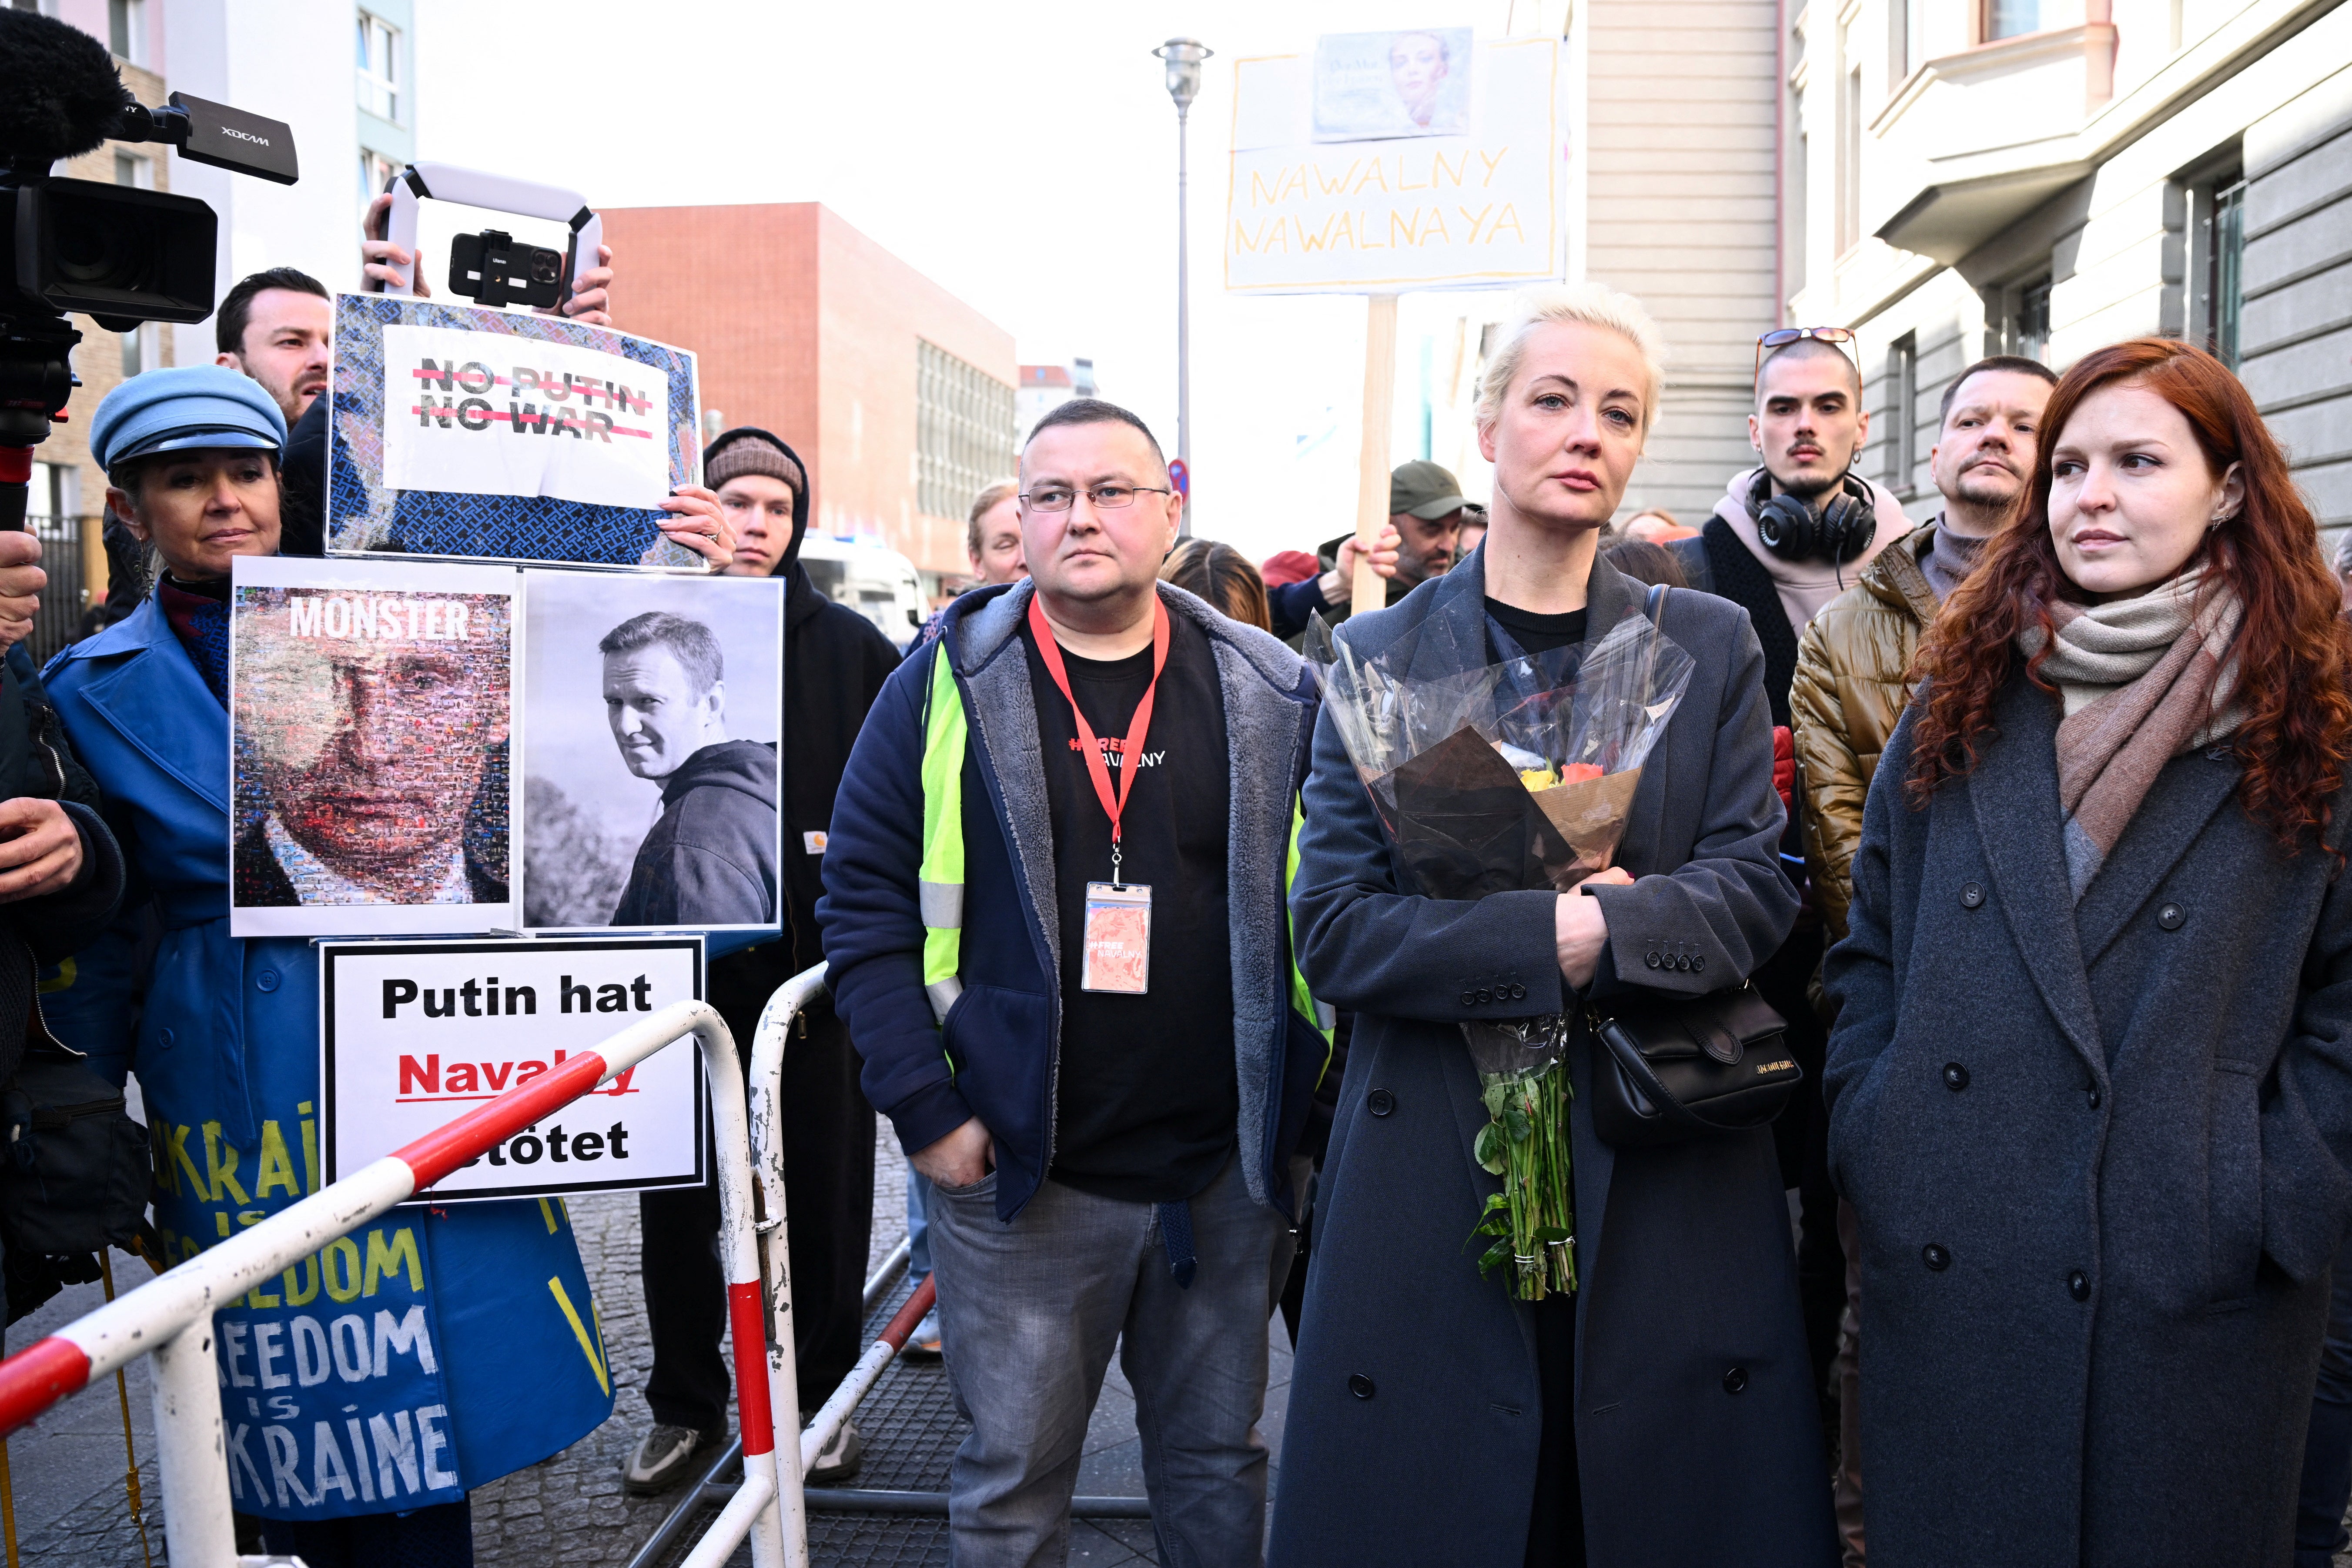 Yulia Navalnaya, the widow of Alexei Navalny, the Russian opposition leader who died in a prison camp, stands in a queue outside the Russian Embassy on the final day of the presidential election in Russia, in Berlin